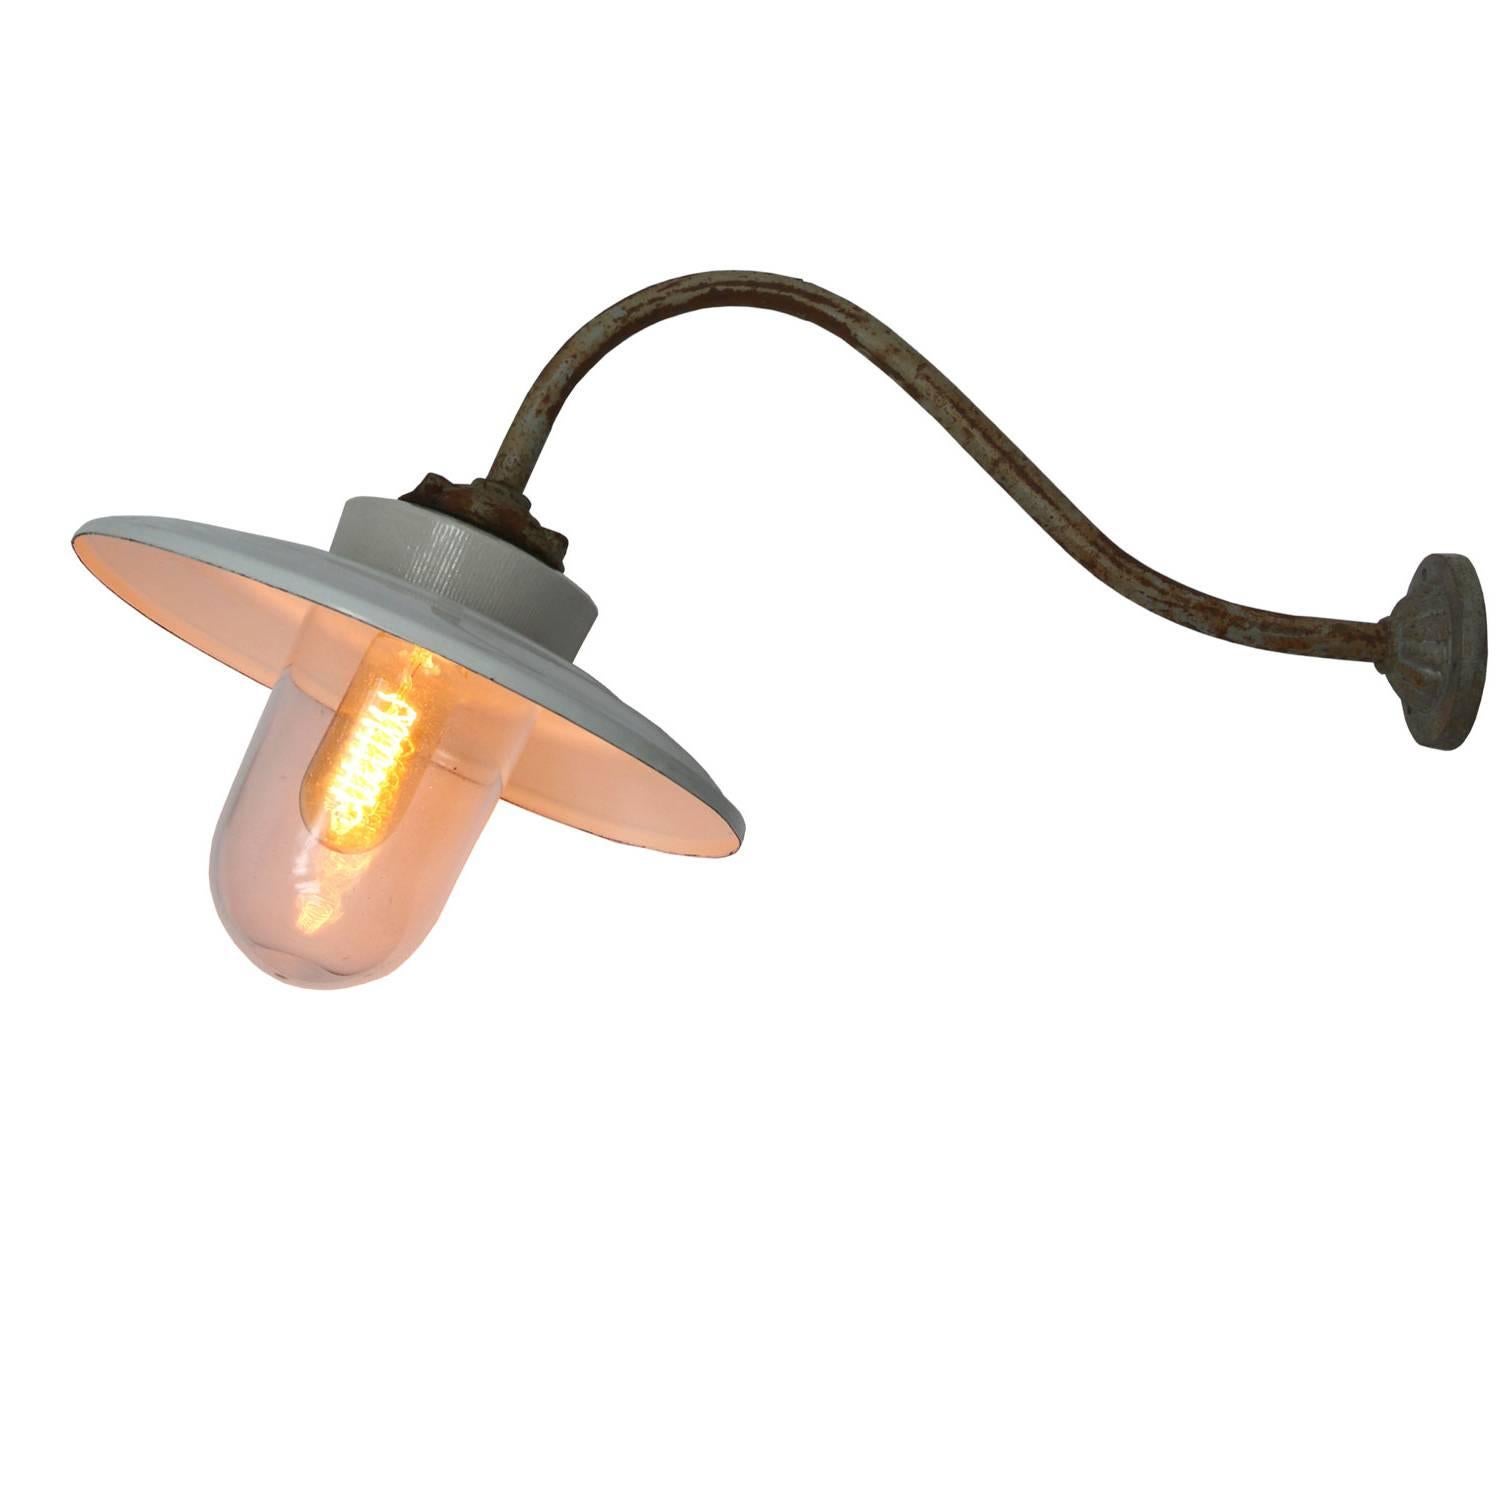 White enamel industrial wall light with white interior.
Cast iron and porcelain top, clear glass.
Diameter cast iron wall mount: 9 cm, 3 holes to secure.
All lamps have been made suitable by international standards for incandescent light bulbs,